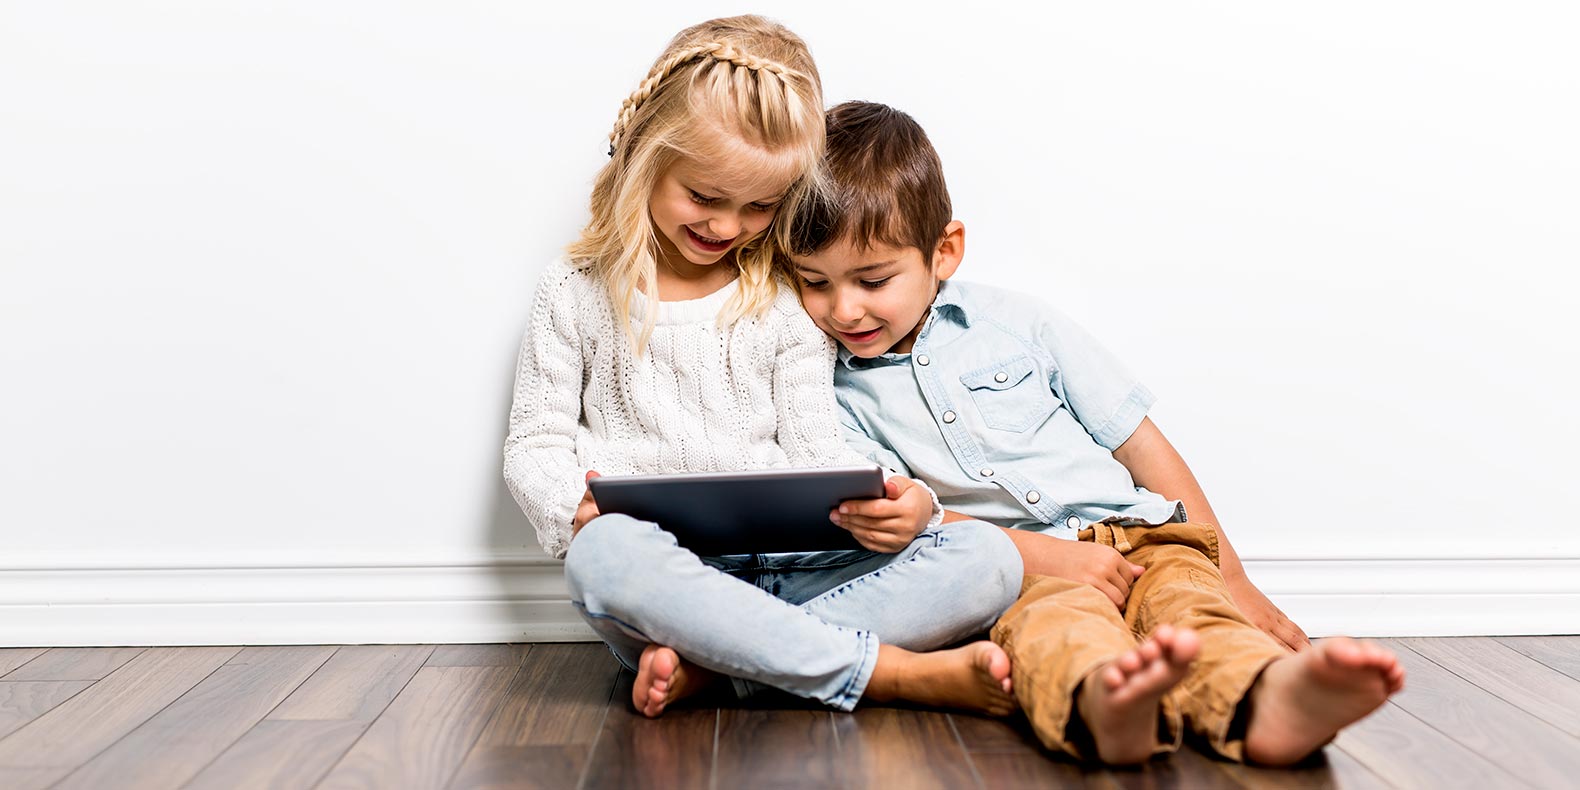 IoT Device Safety for Children